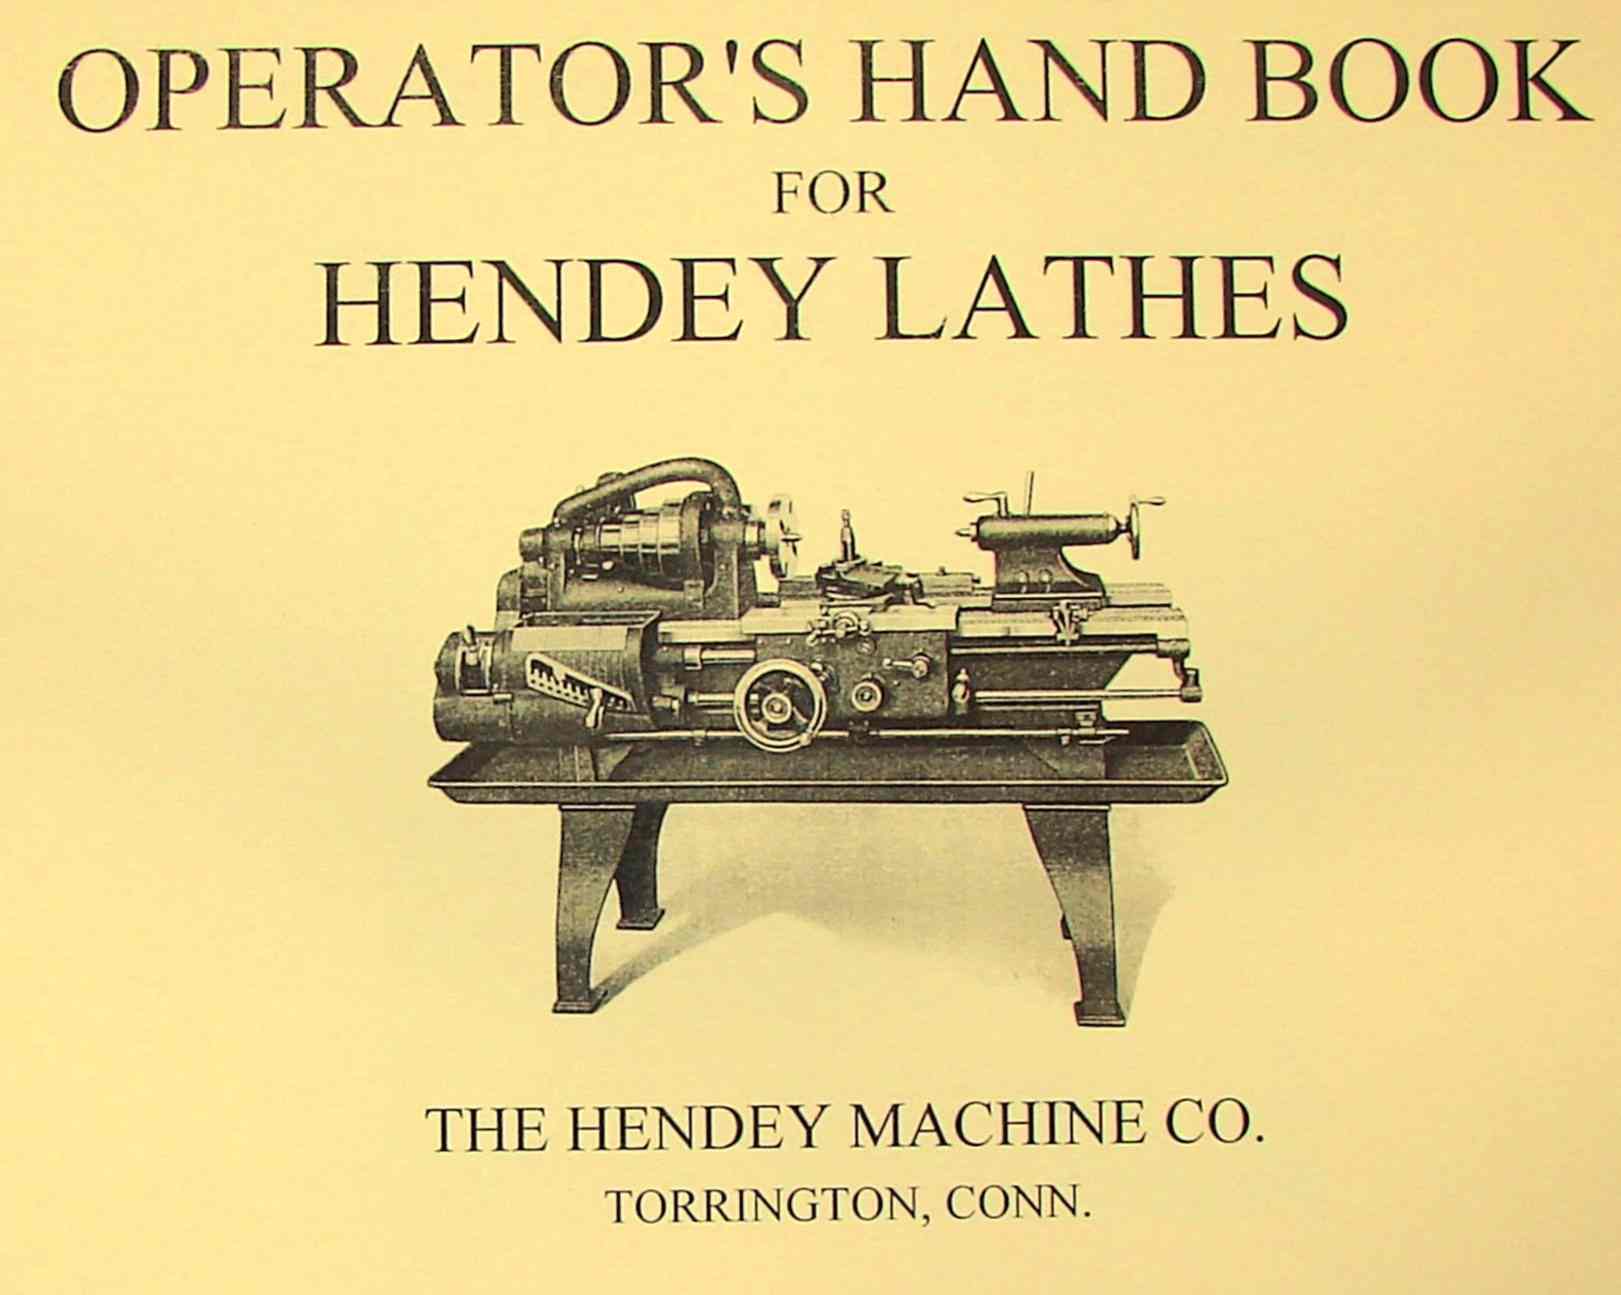 Hendey Lathe and Accessories Catalog 